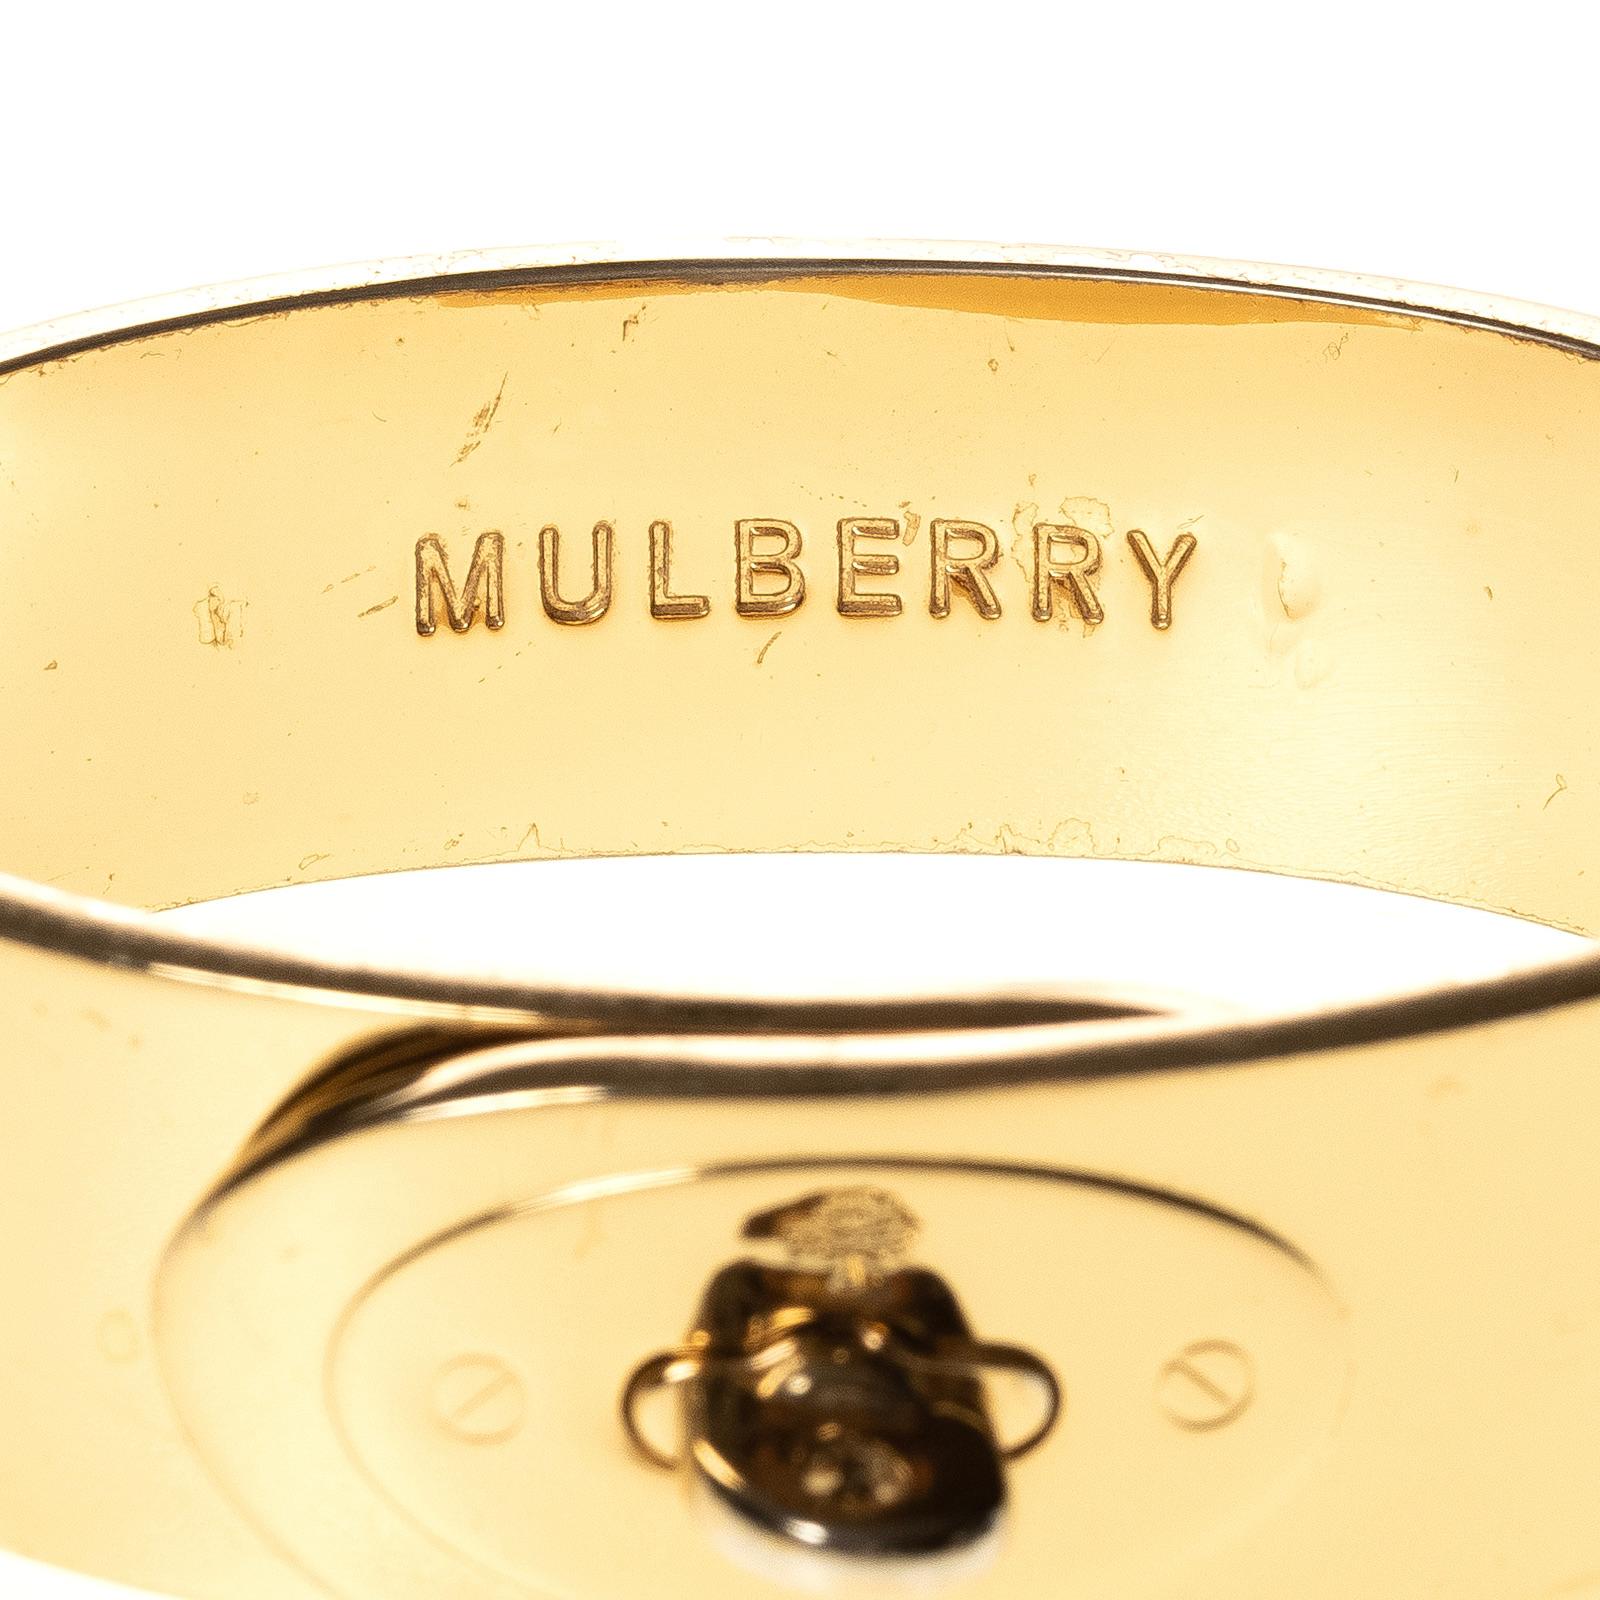 Mulberry gold-tone metal Bayswater Bracelet features hinge & turn-lock closures. Logo on the interior.

COLOR: Gold 
MATERIAL: Gold-tone metal 
MEASURES: inside circumference: 7.5”, W: 0.8”
EST. RETAIL: 425.00 
CONDITION: Good - faint scratches and